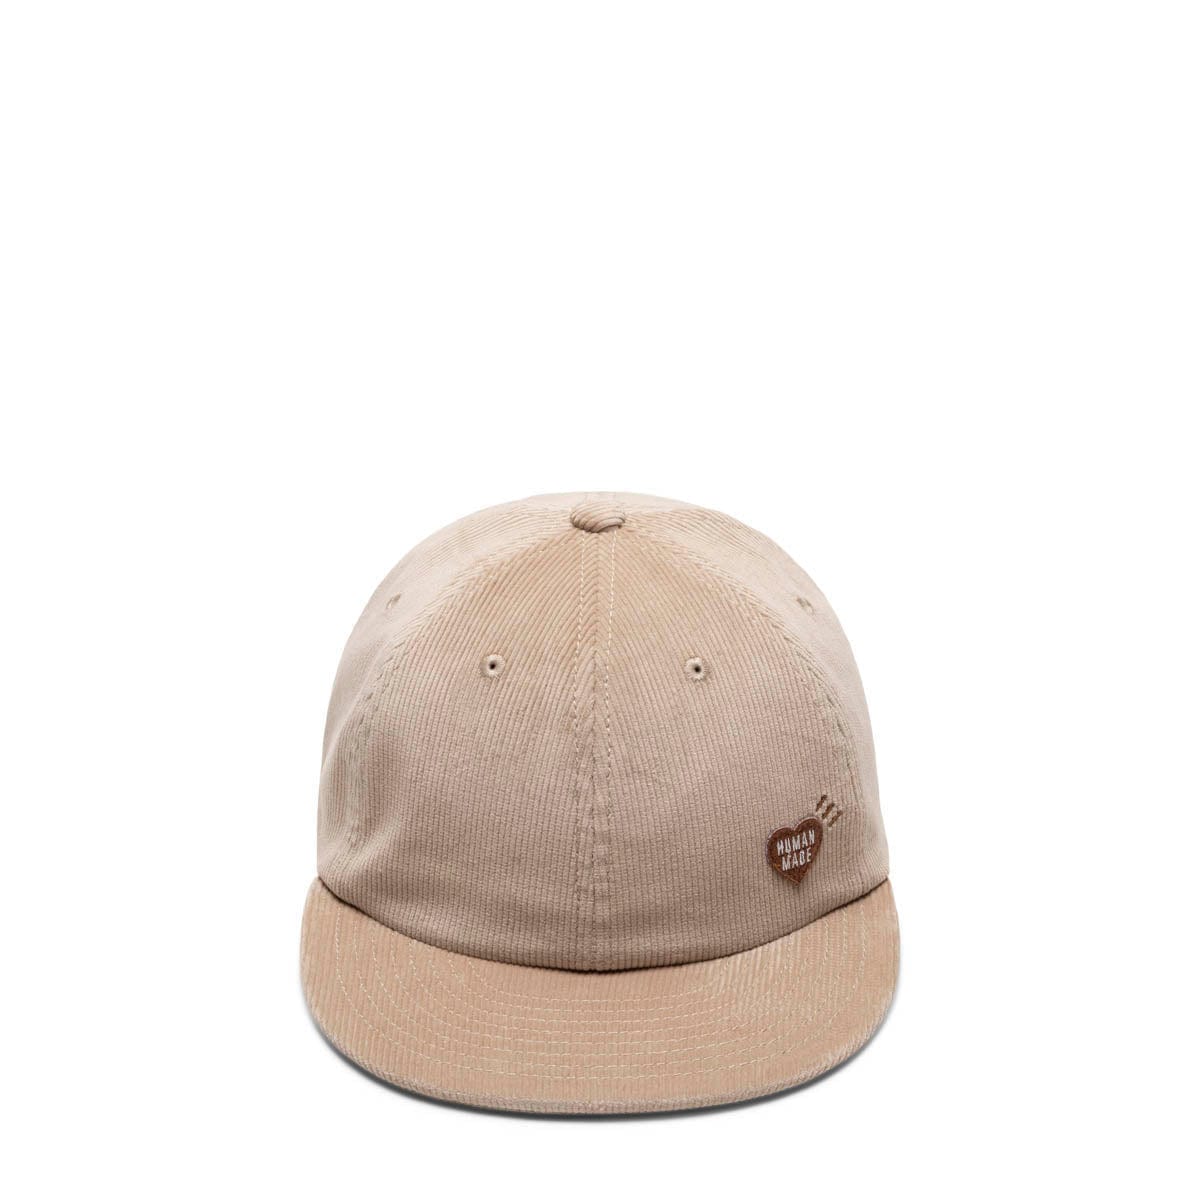 Distressed Beige Crystallized Ball Cap